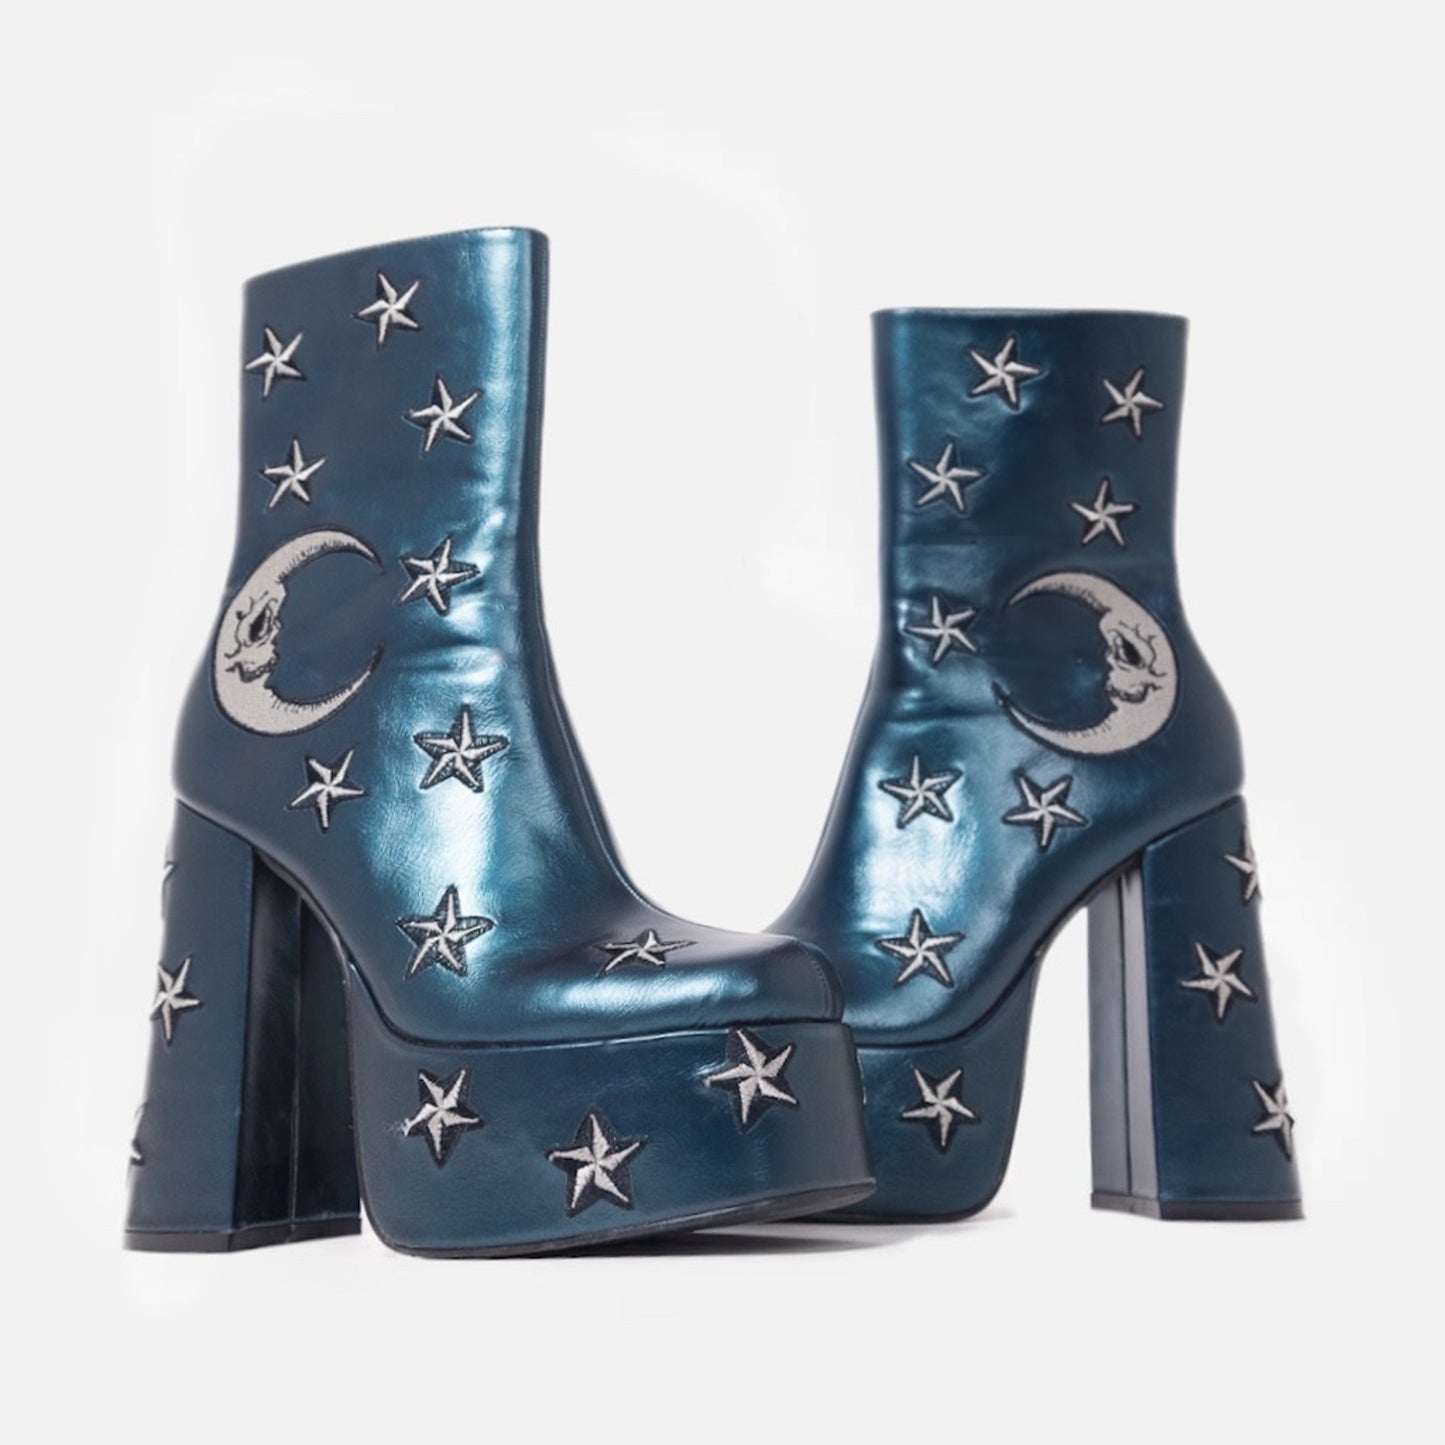 Dreams of Mooncraft Teal Heeled Boots - Ankle Boots - KOI Footwear - Blue - Platform Detail